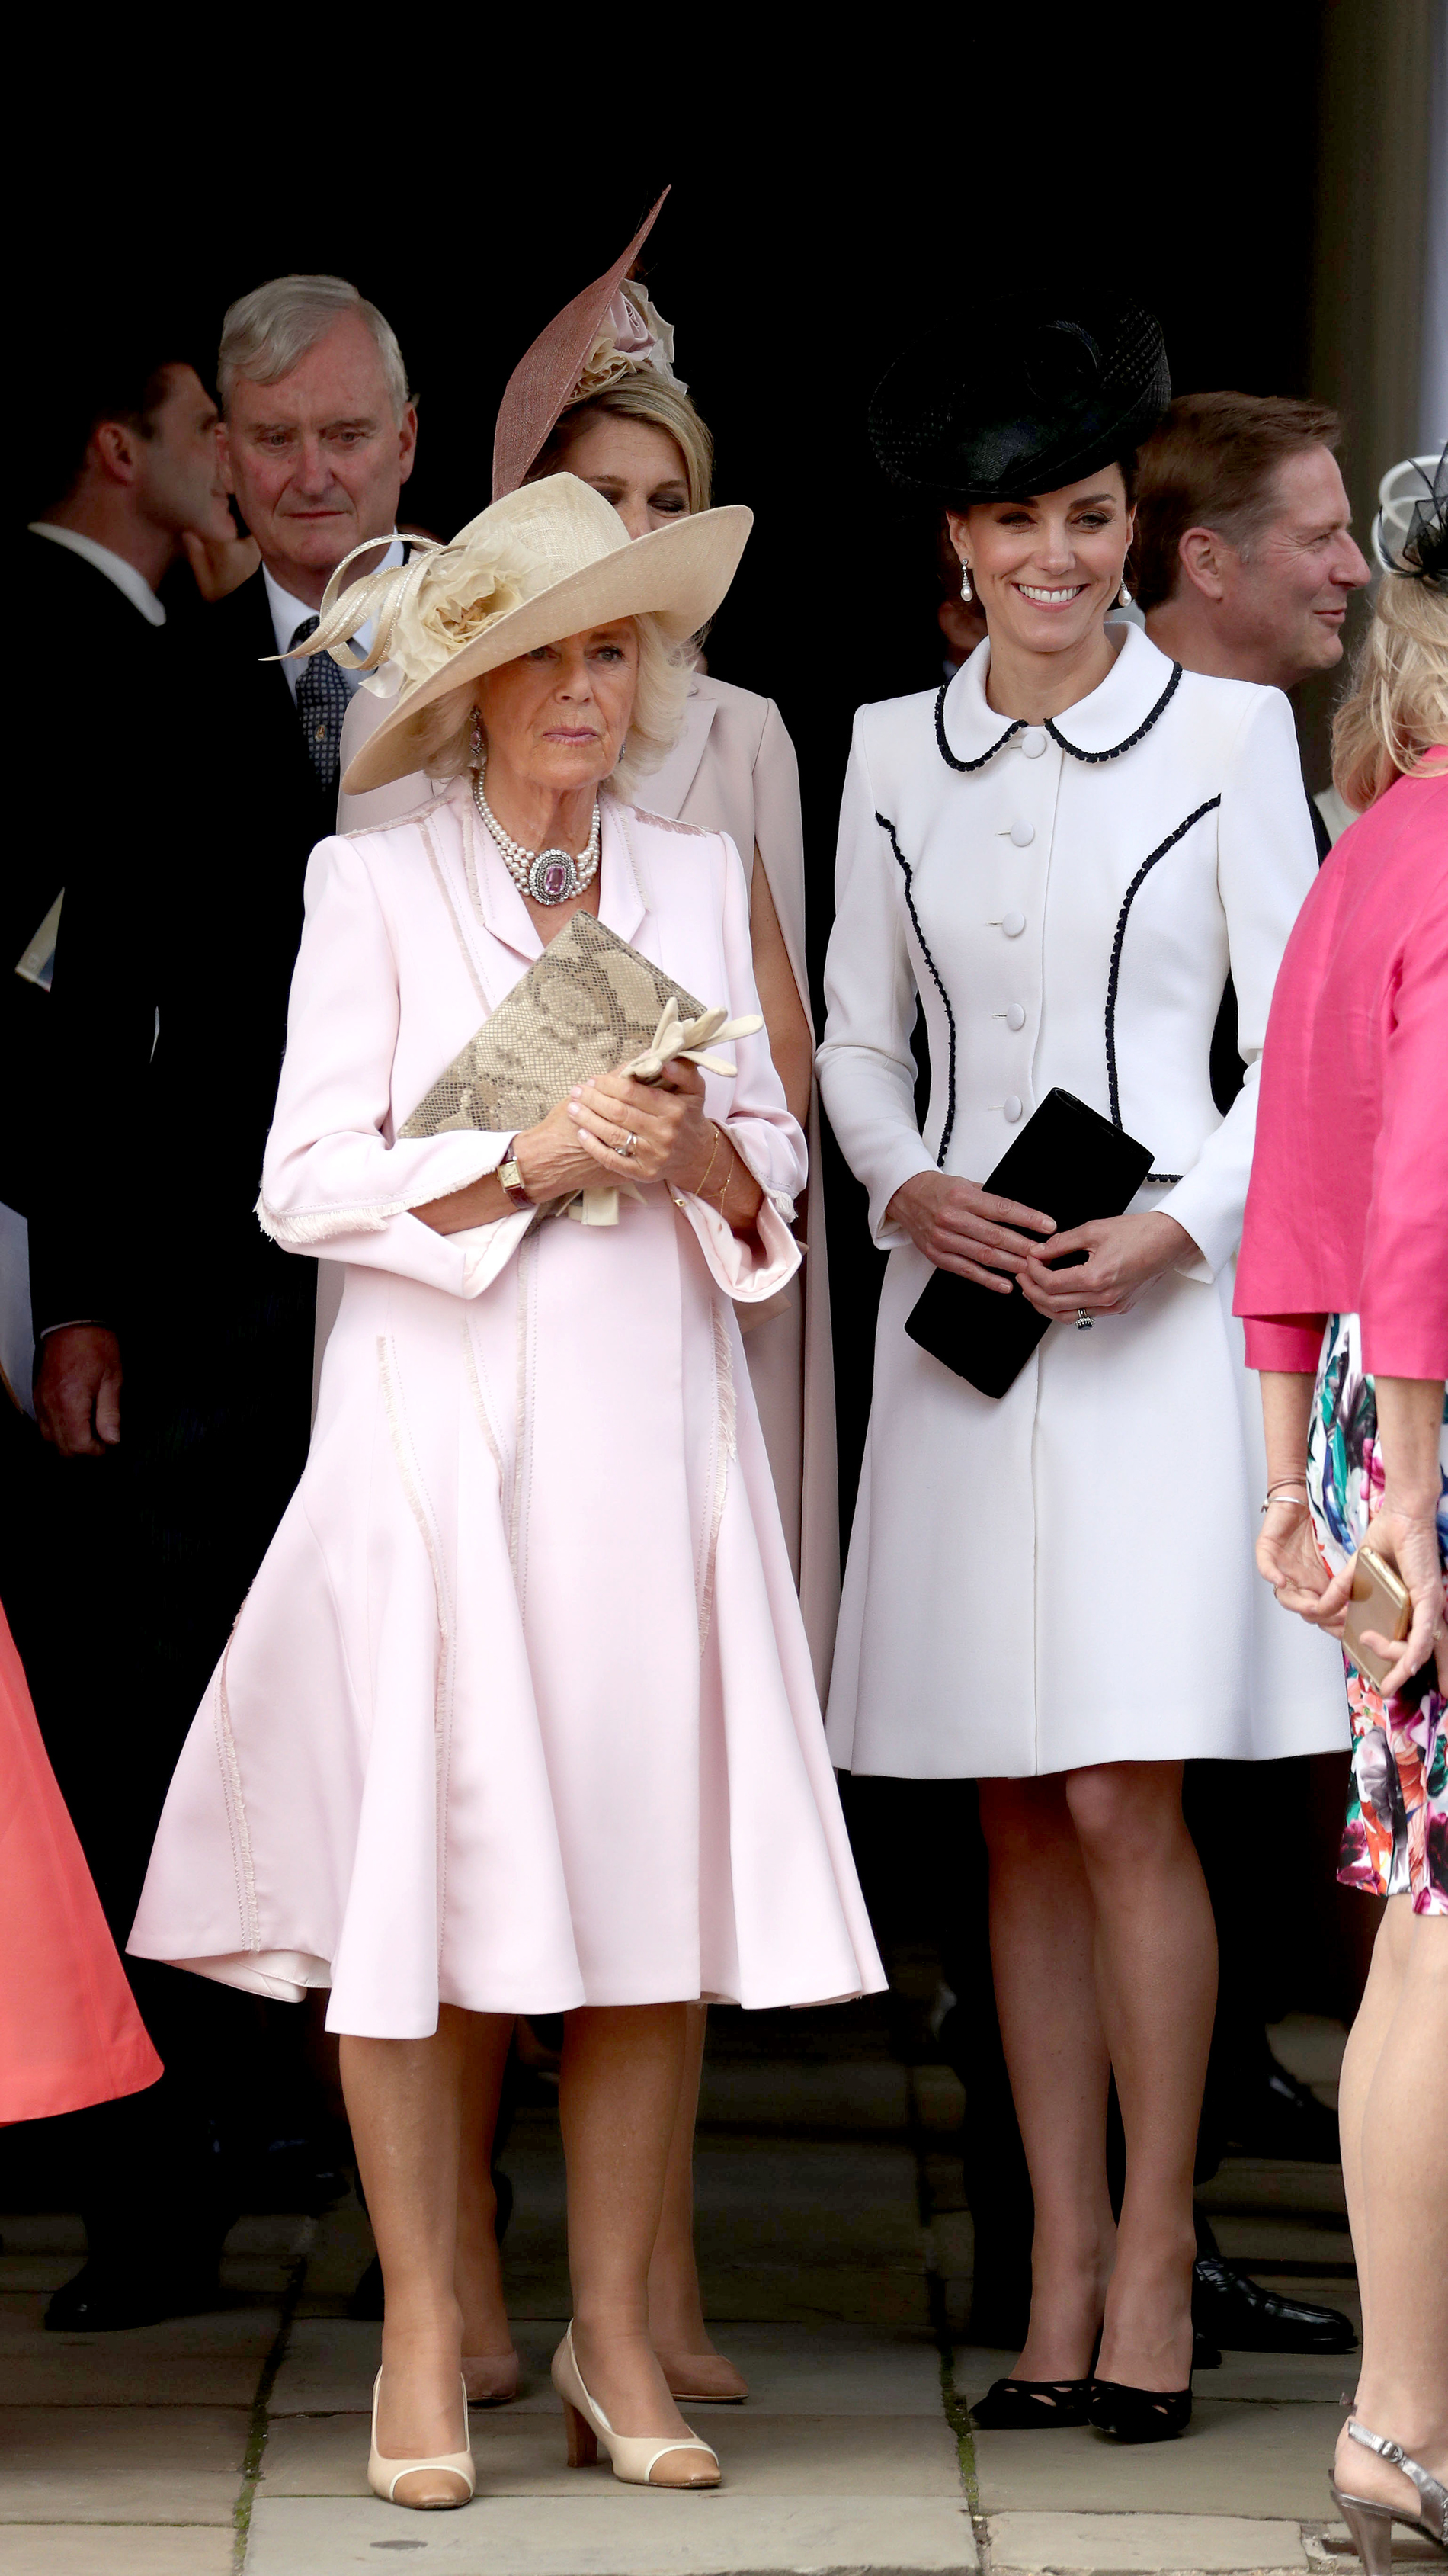 The Duchess of Cornwall (left) and the Duchess of Cambridge, stand together as they watch the annual Order of the Garter Service at St George's Chapel